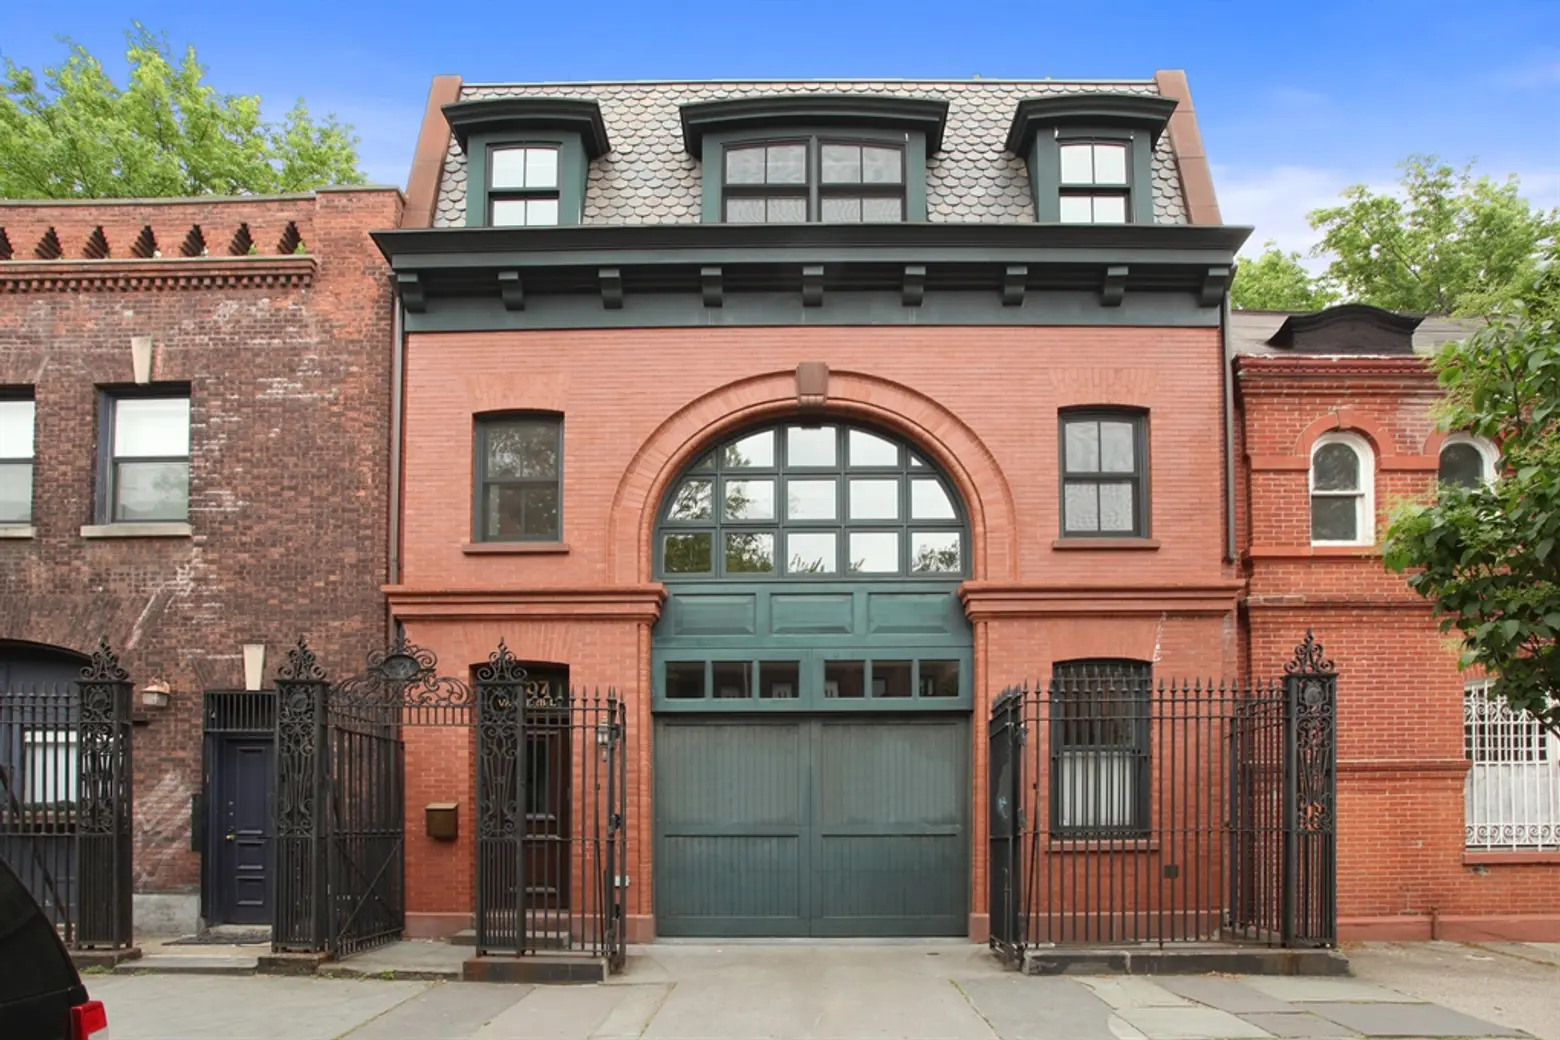 Hold Your Horses, This Clinton Hill Carriage House is Younger Than You Think